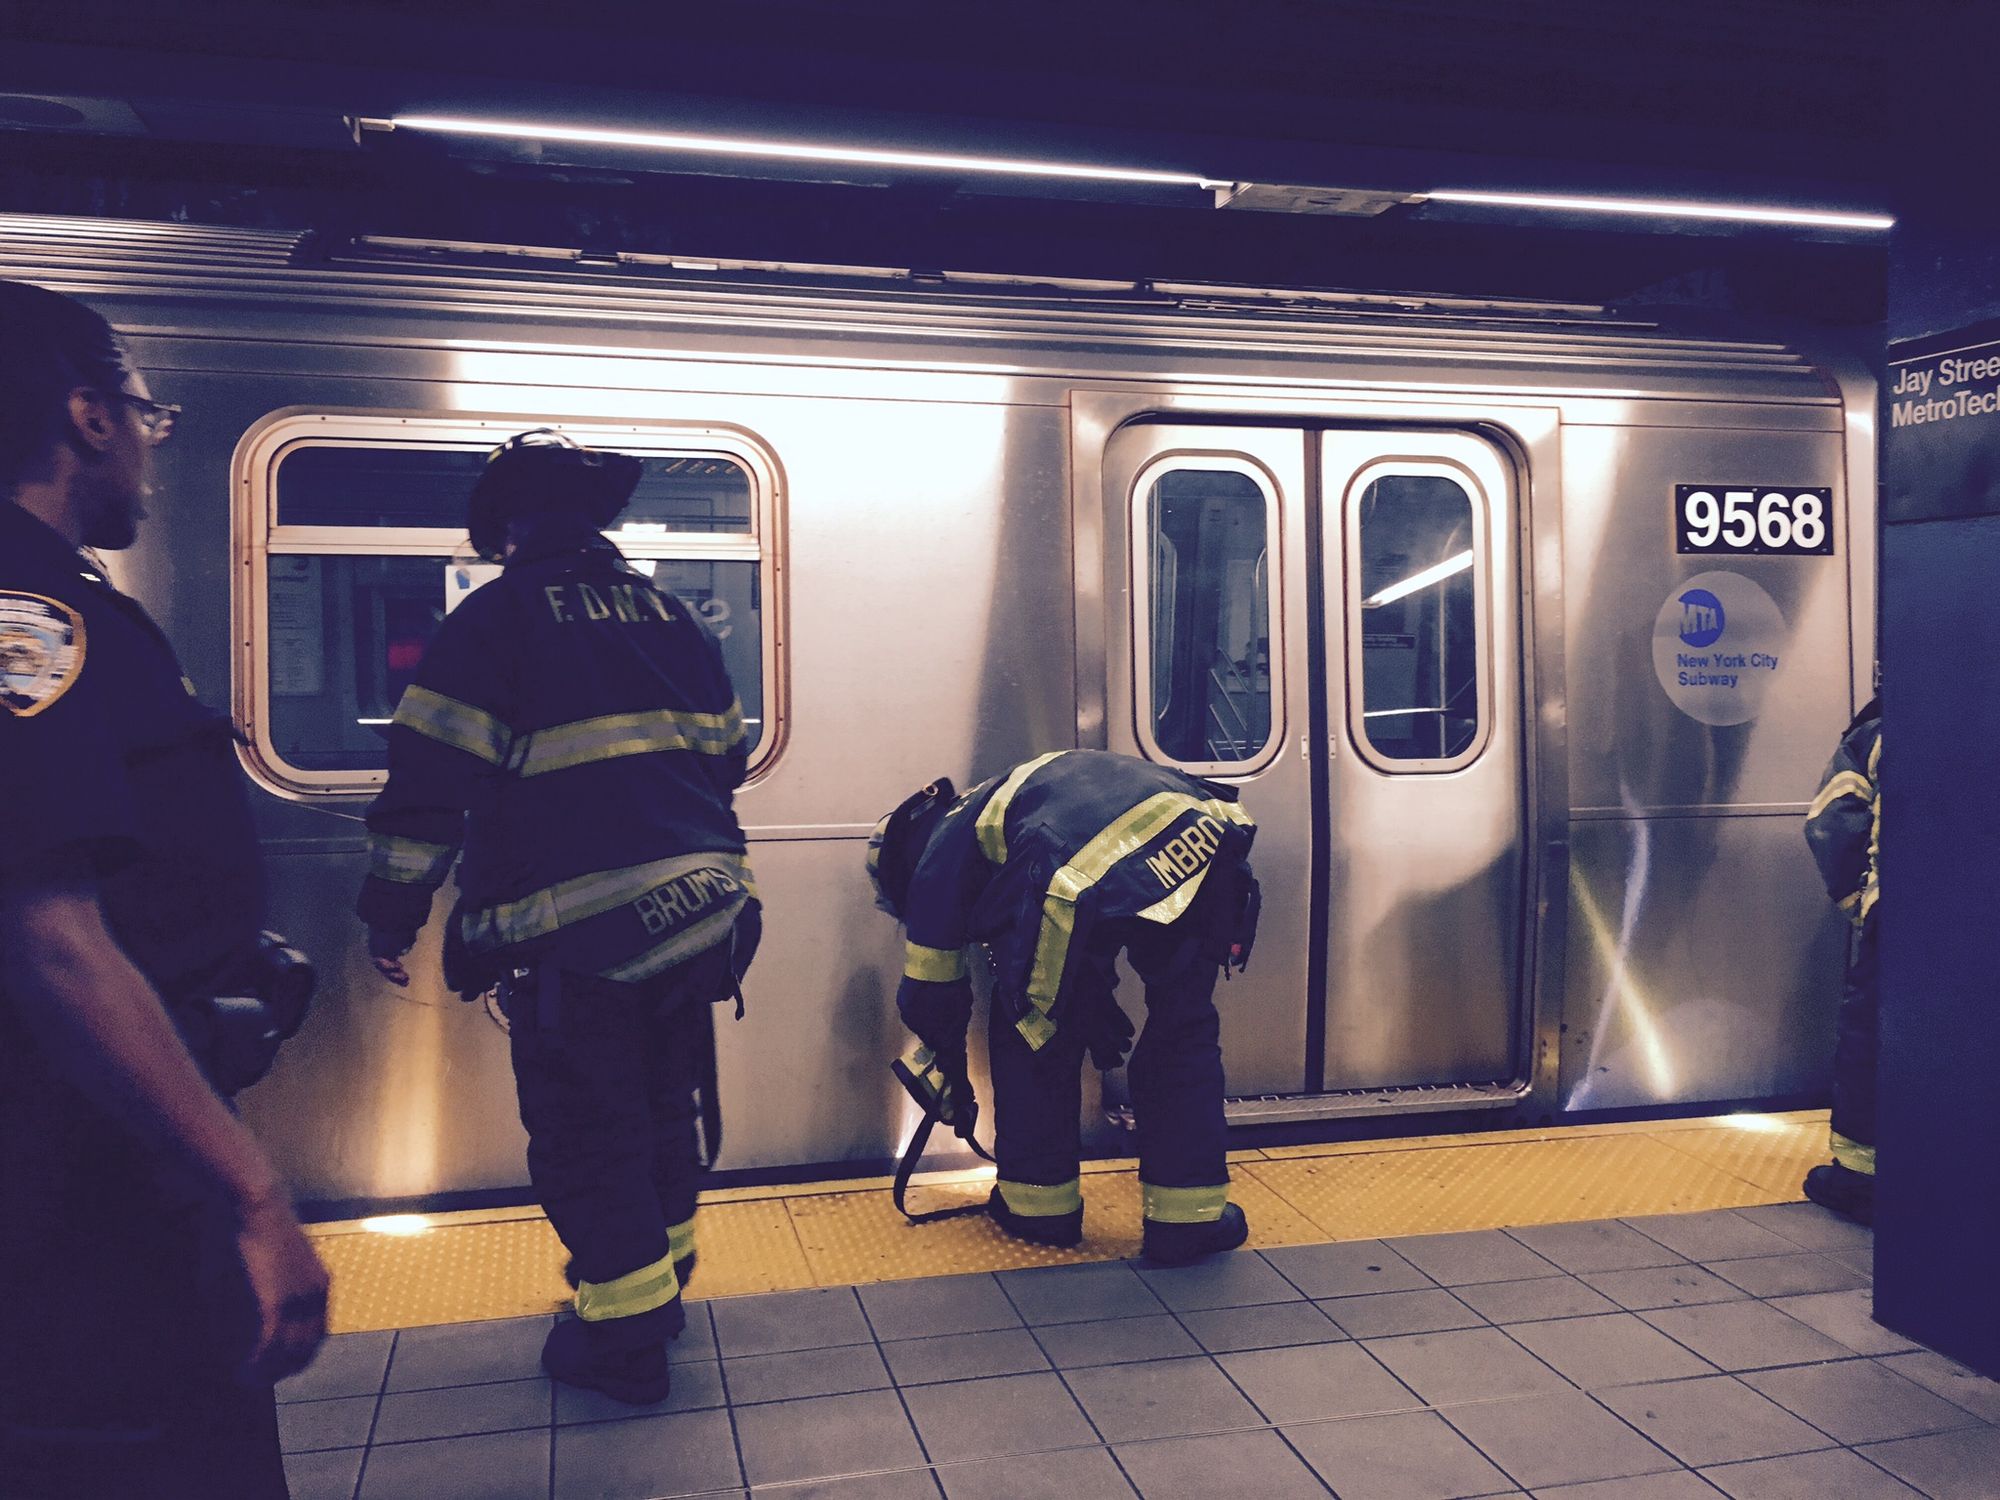 [UPDATE] BREAKING: Man Jumps In Front Of Oncoming F Train At Jay Street-MetroTech Station, Witnesses Say